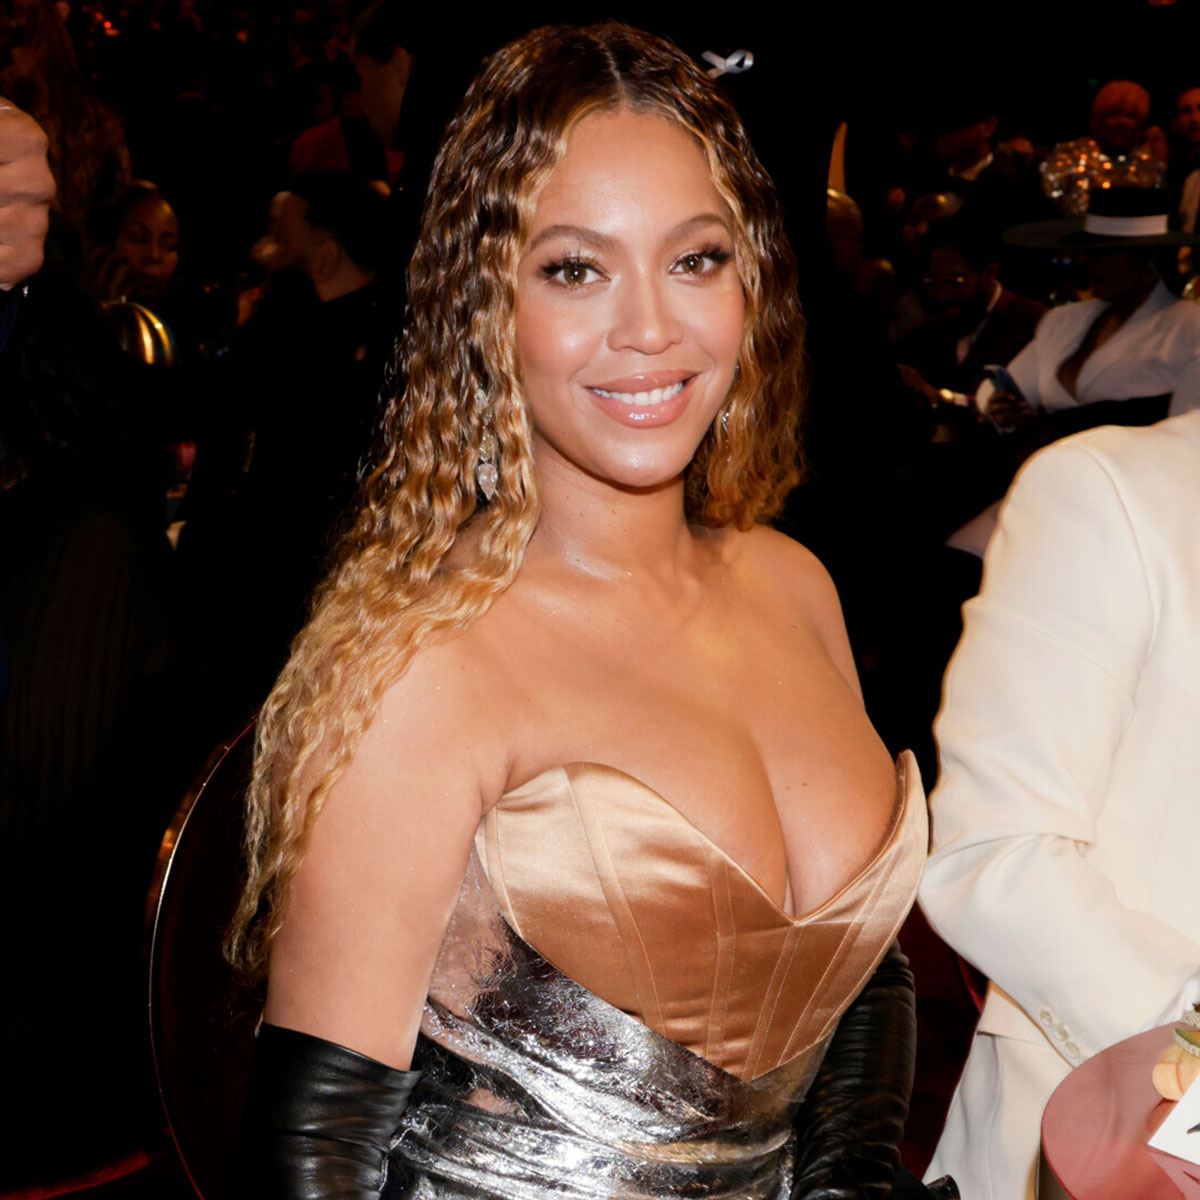 Here's Why Stars Like Beyoncé Are Skipping the 2019 Grammys